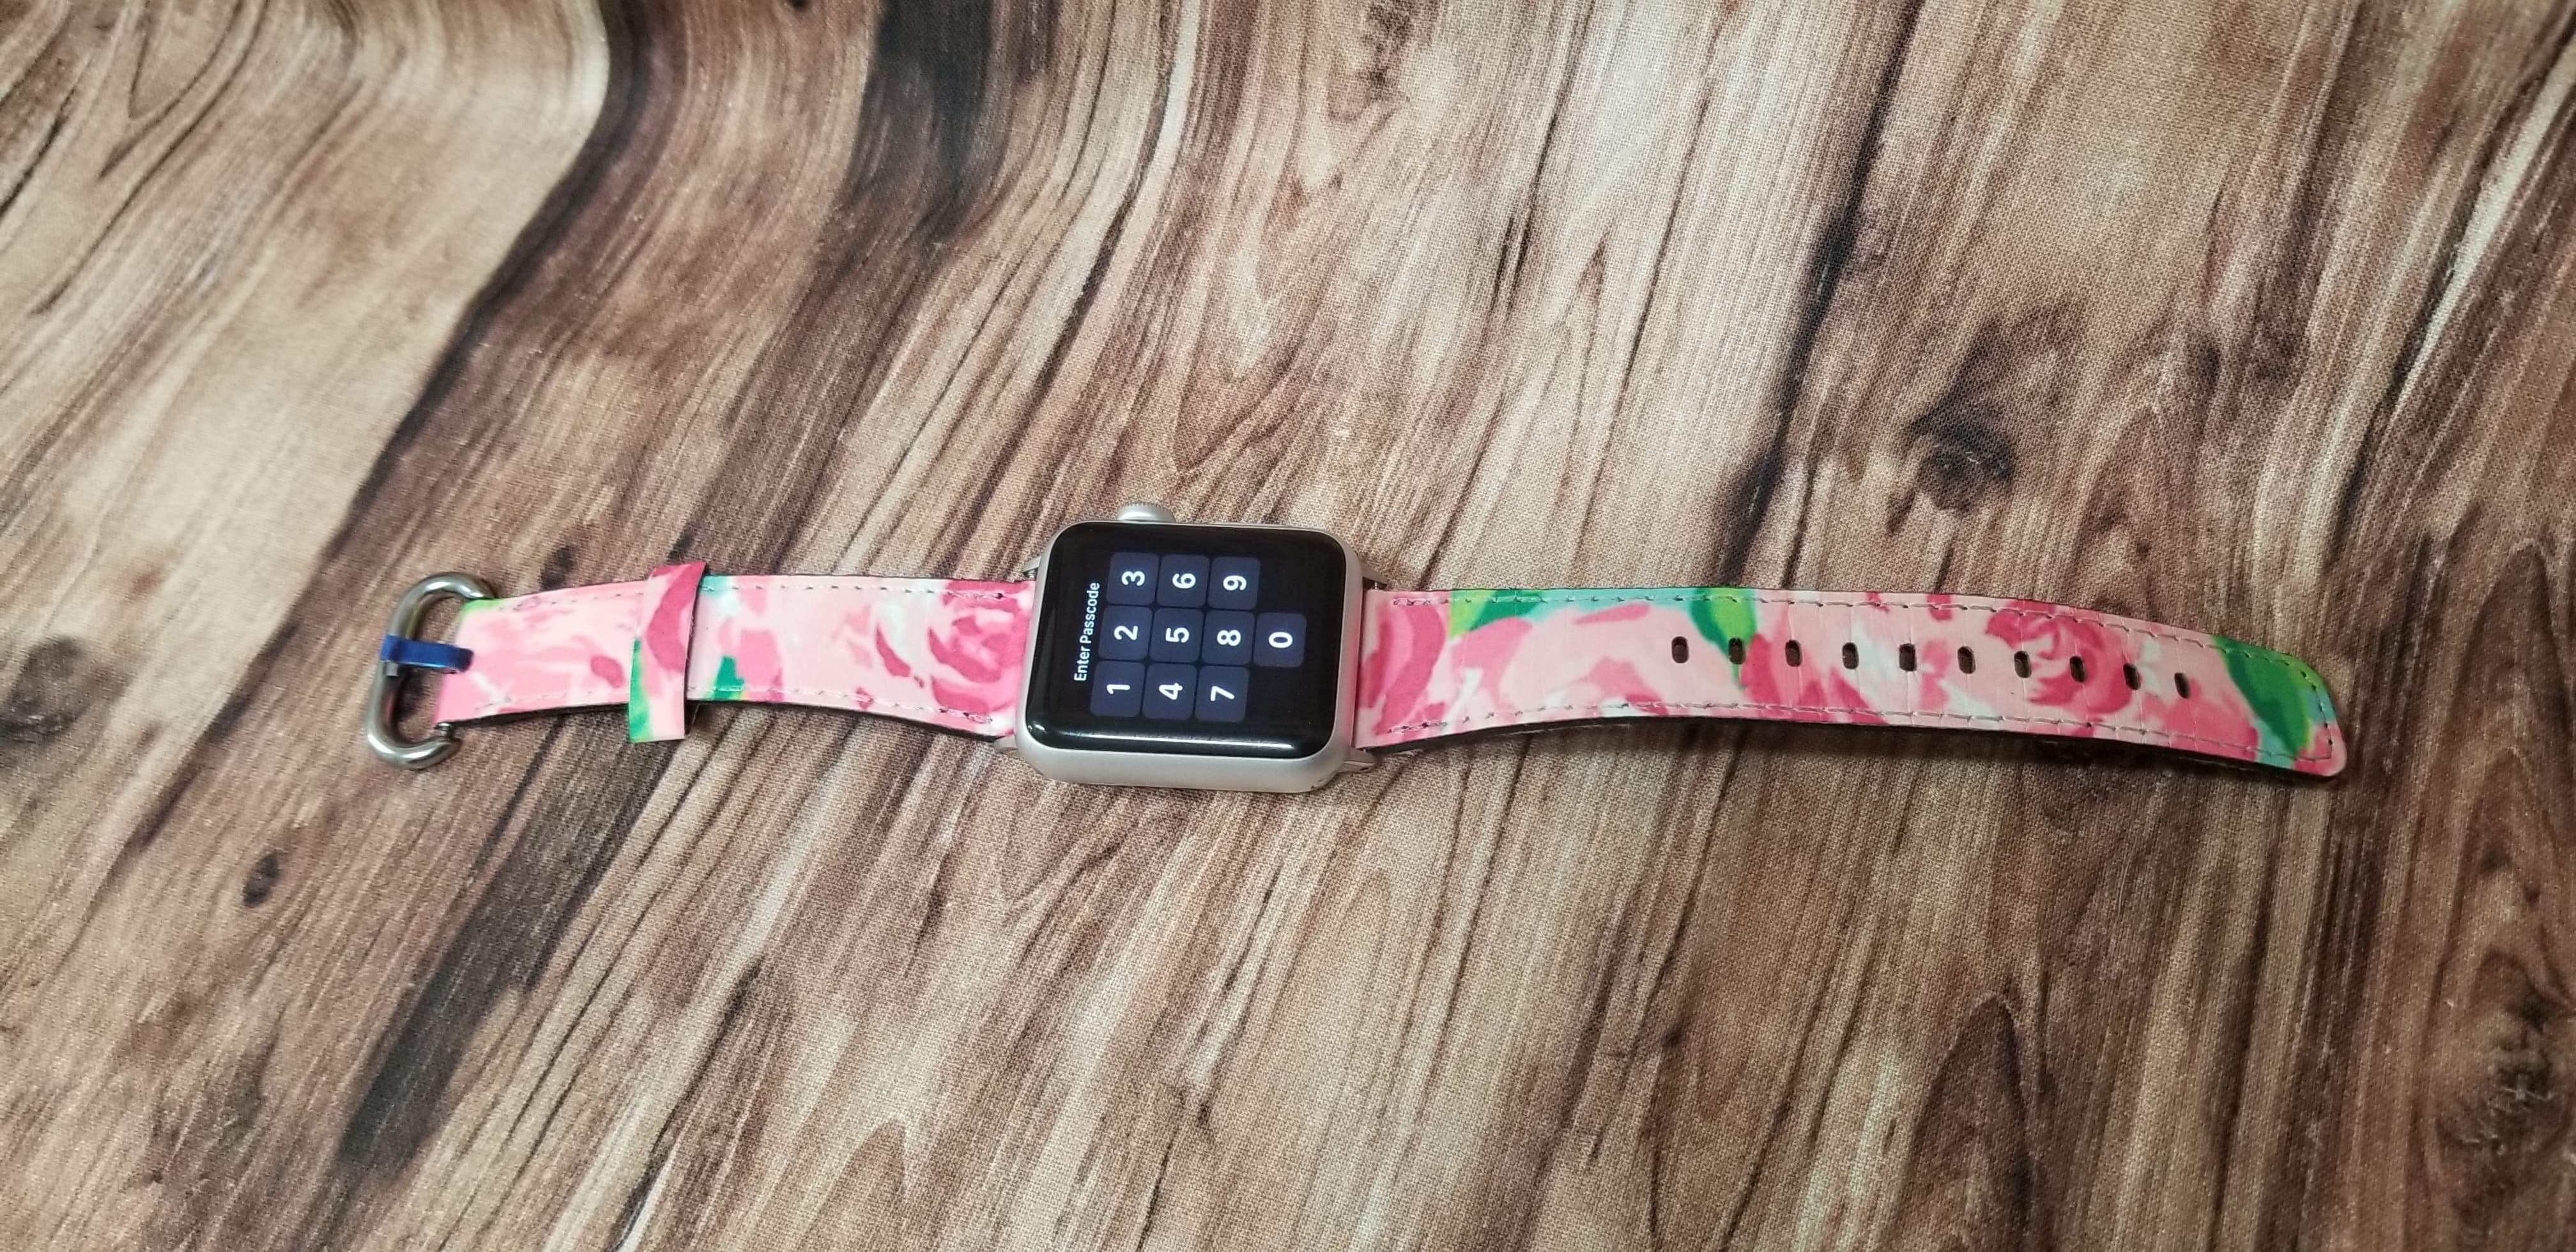 Apple Watch band made with sublimation printing